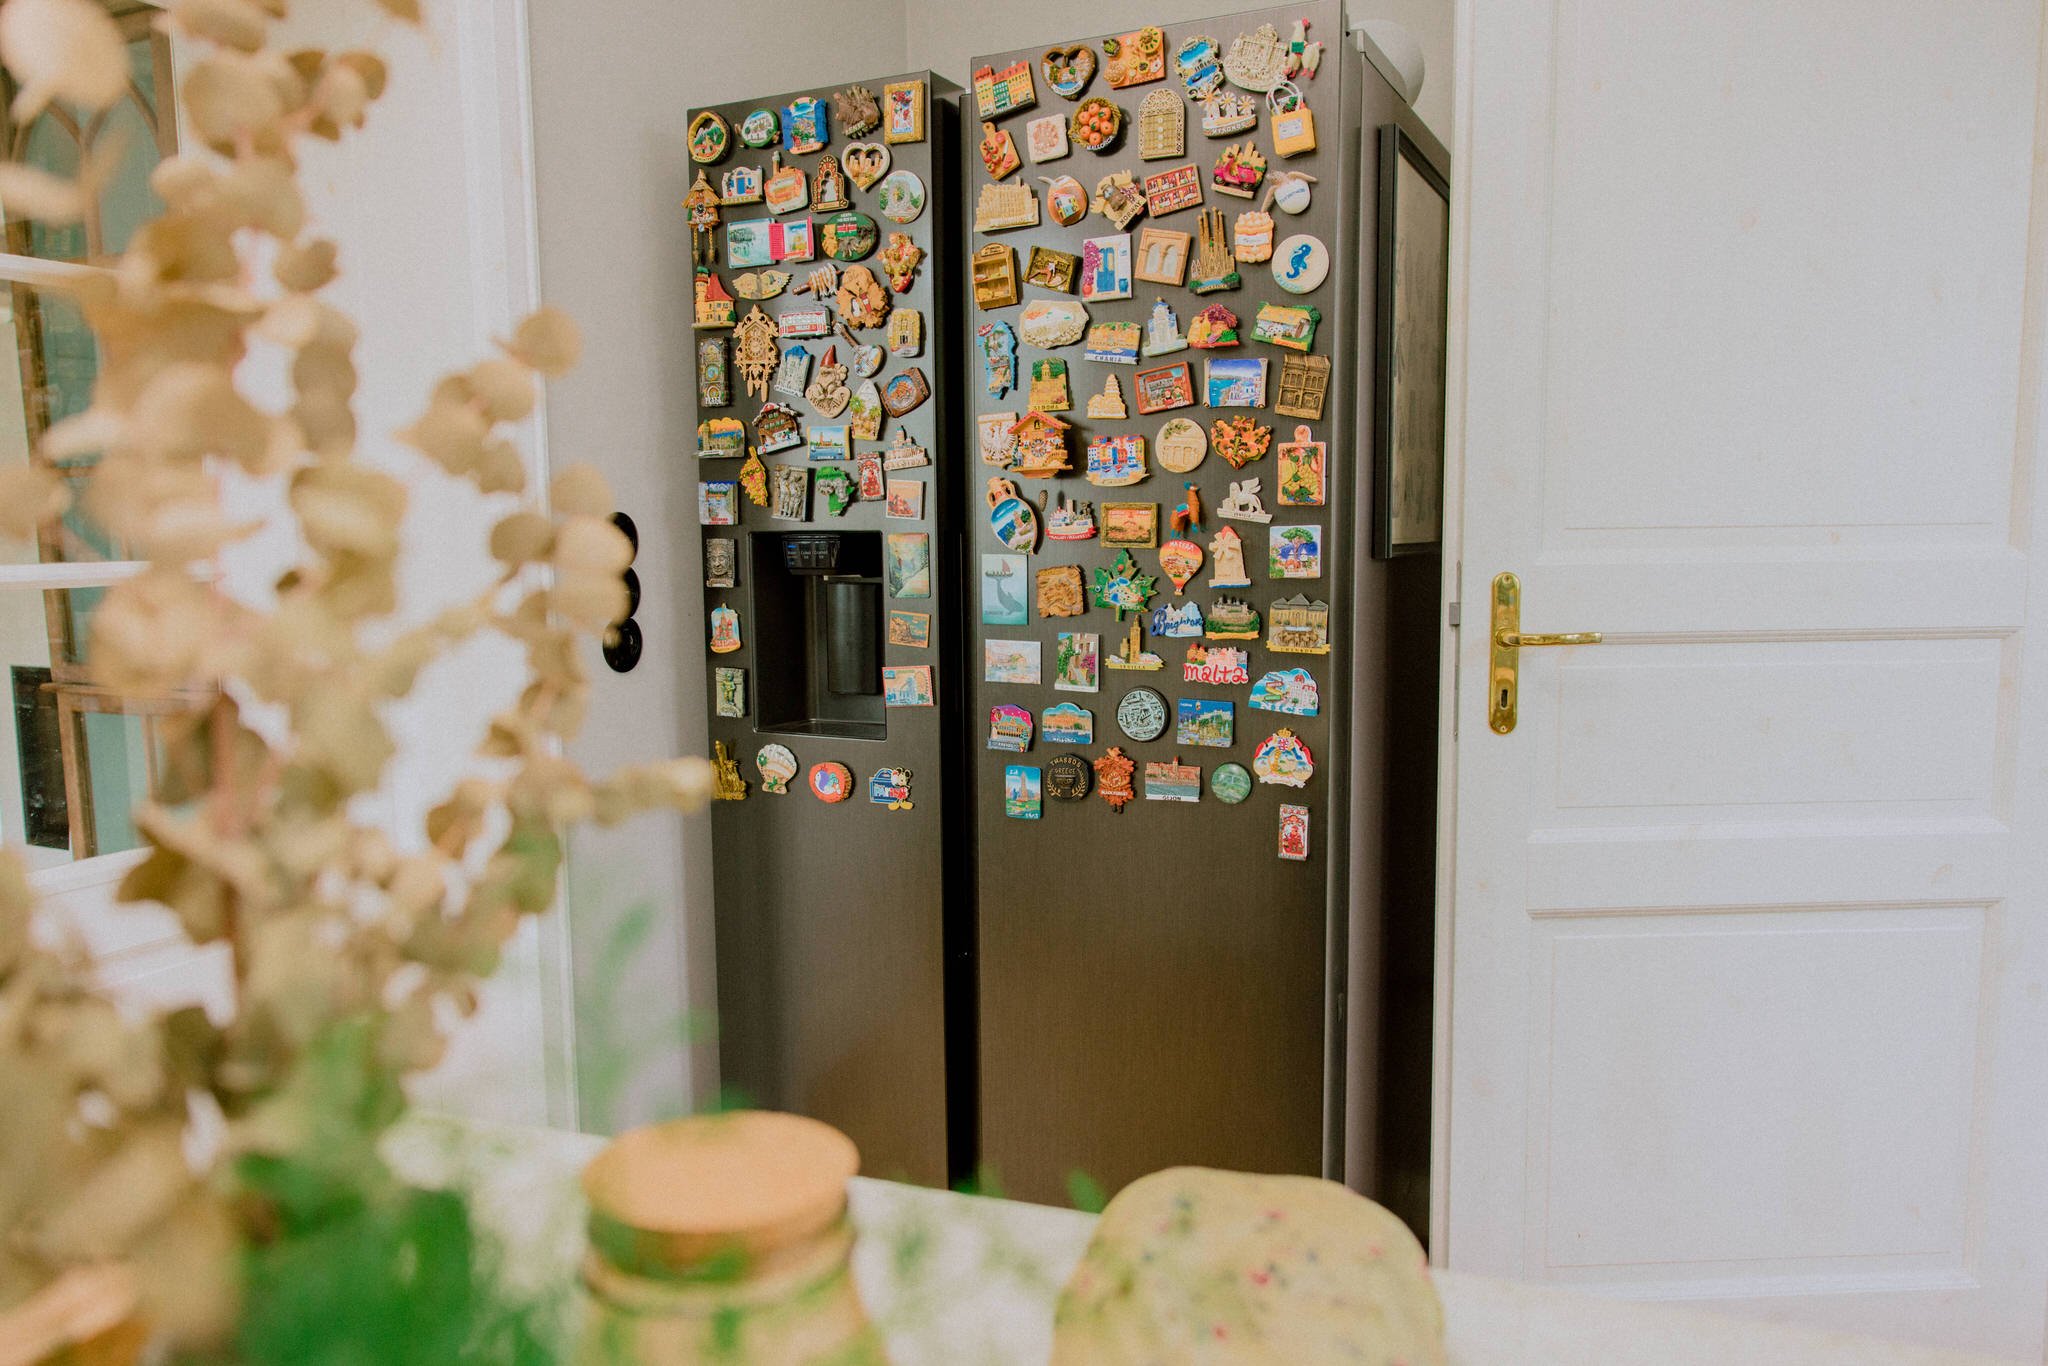 Fridge Tour & Organization - How to Store Food Correctly - Her86m2 8.jpg